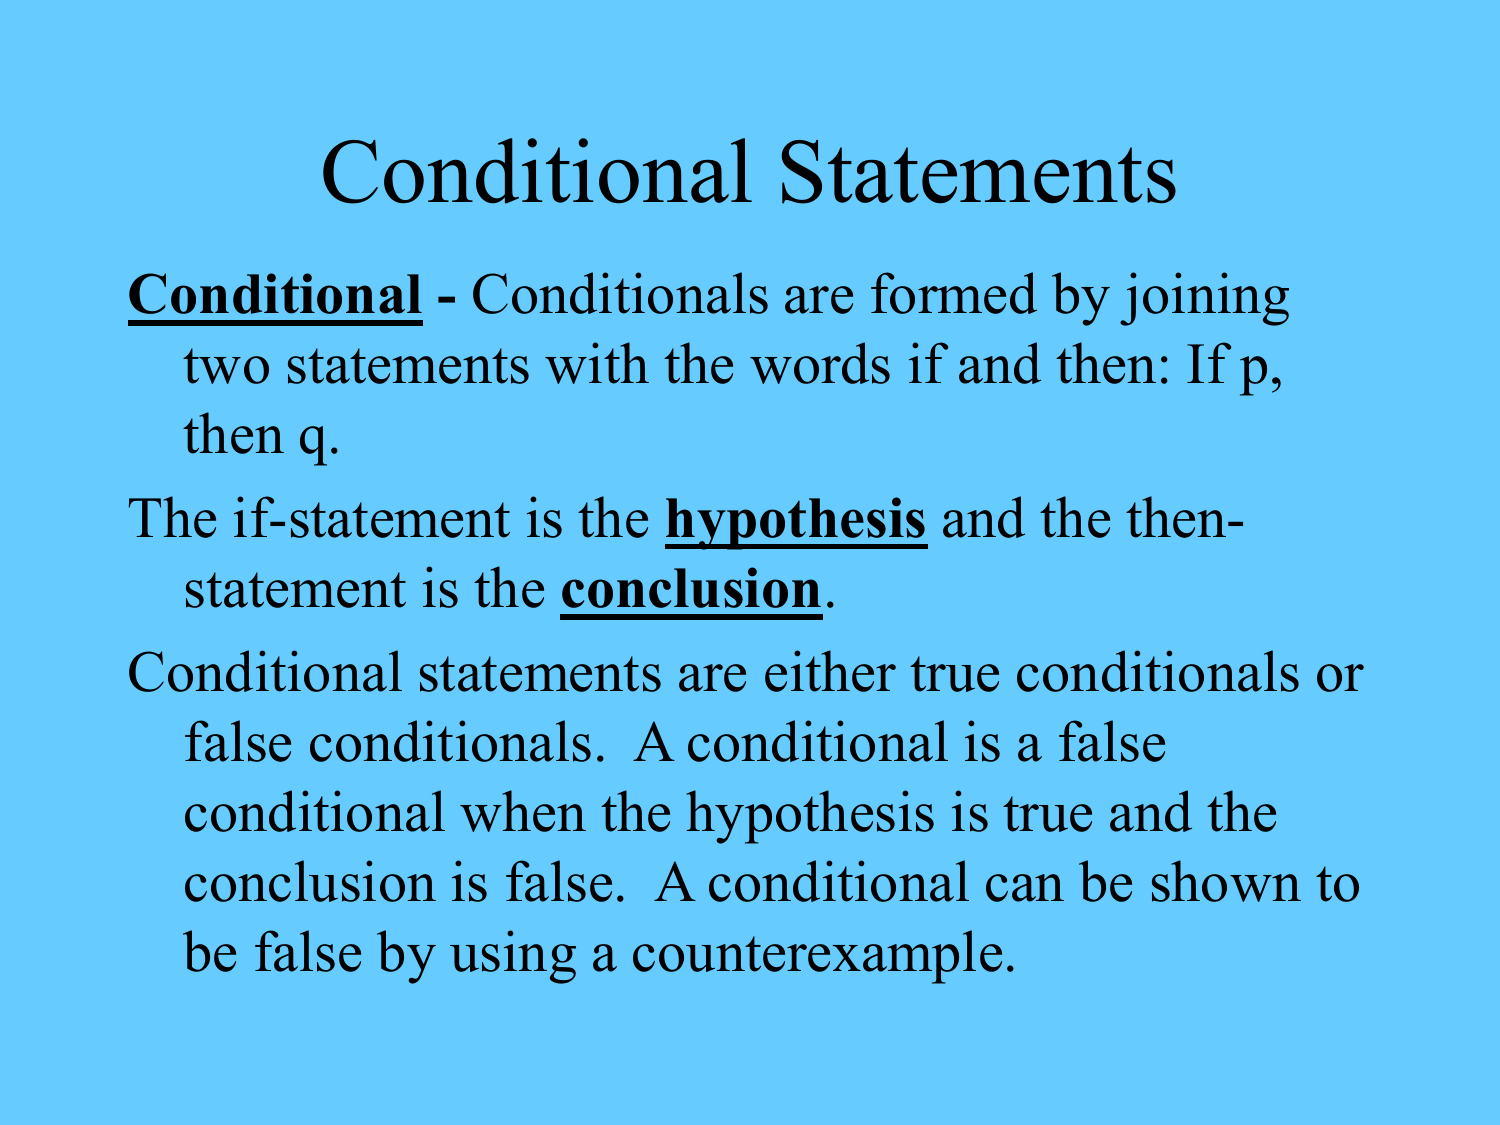 hypothesis of conditional statement